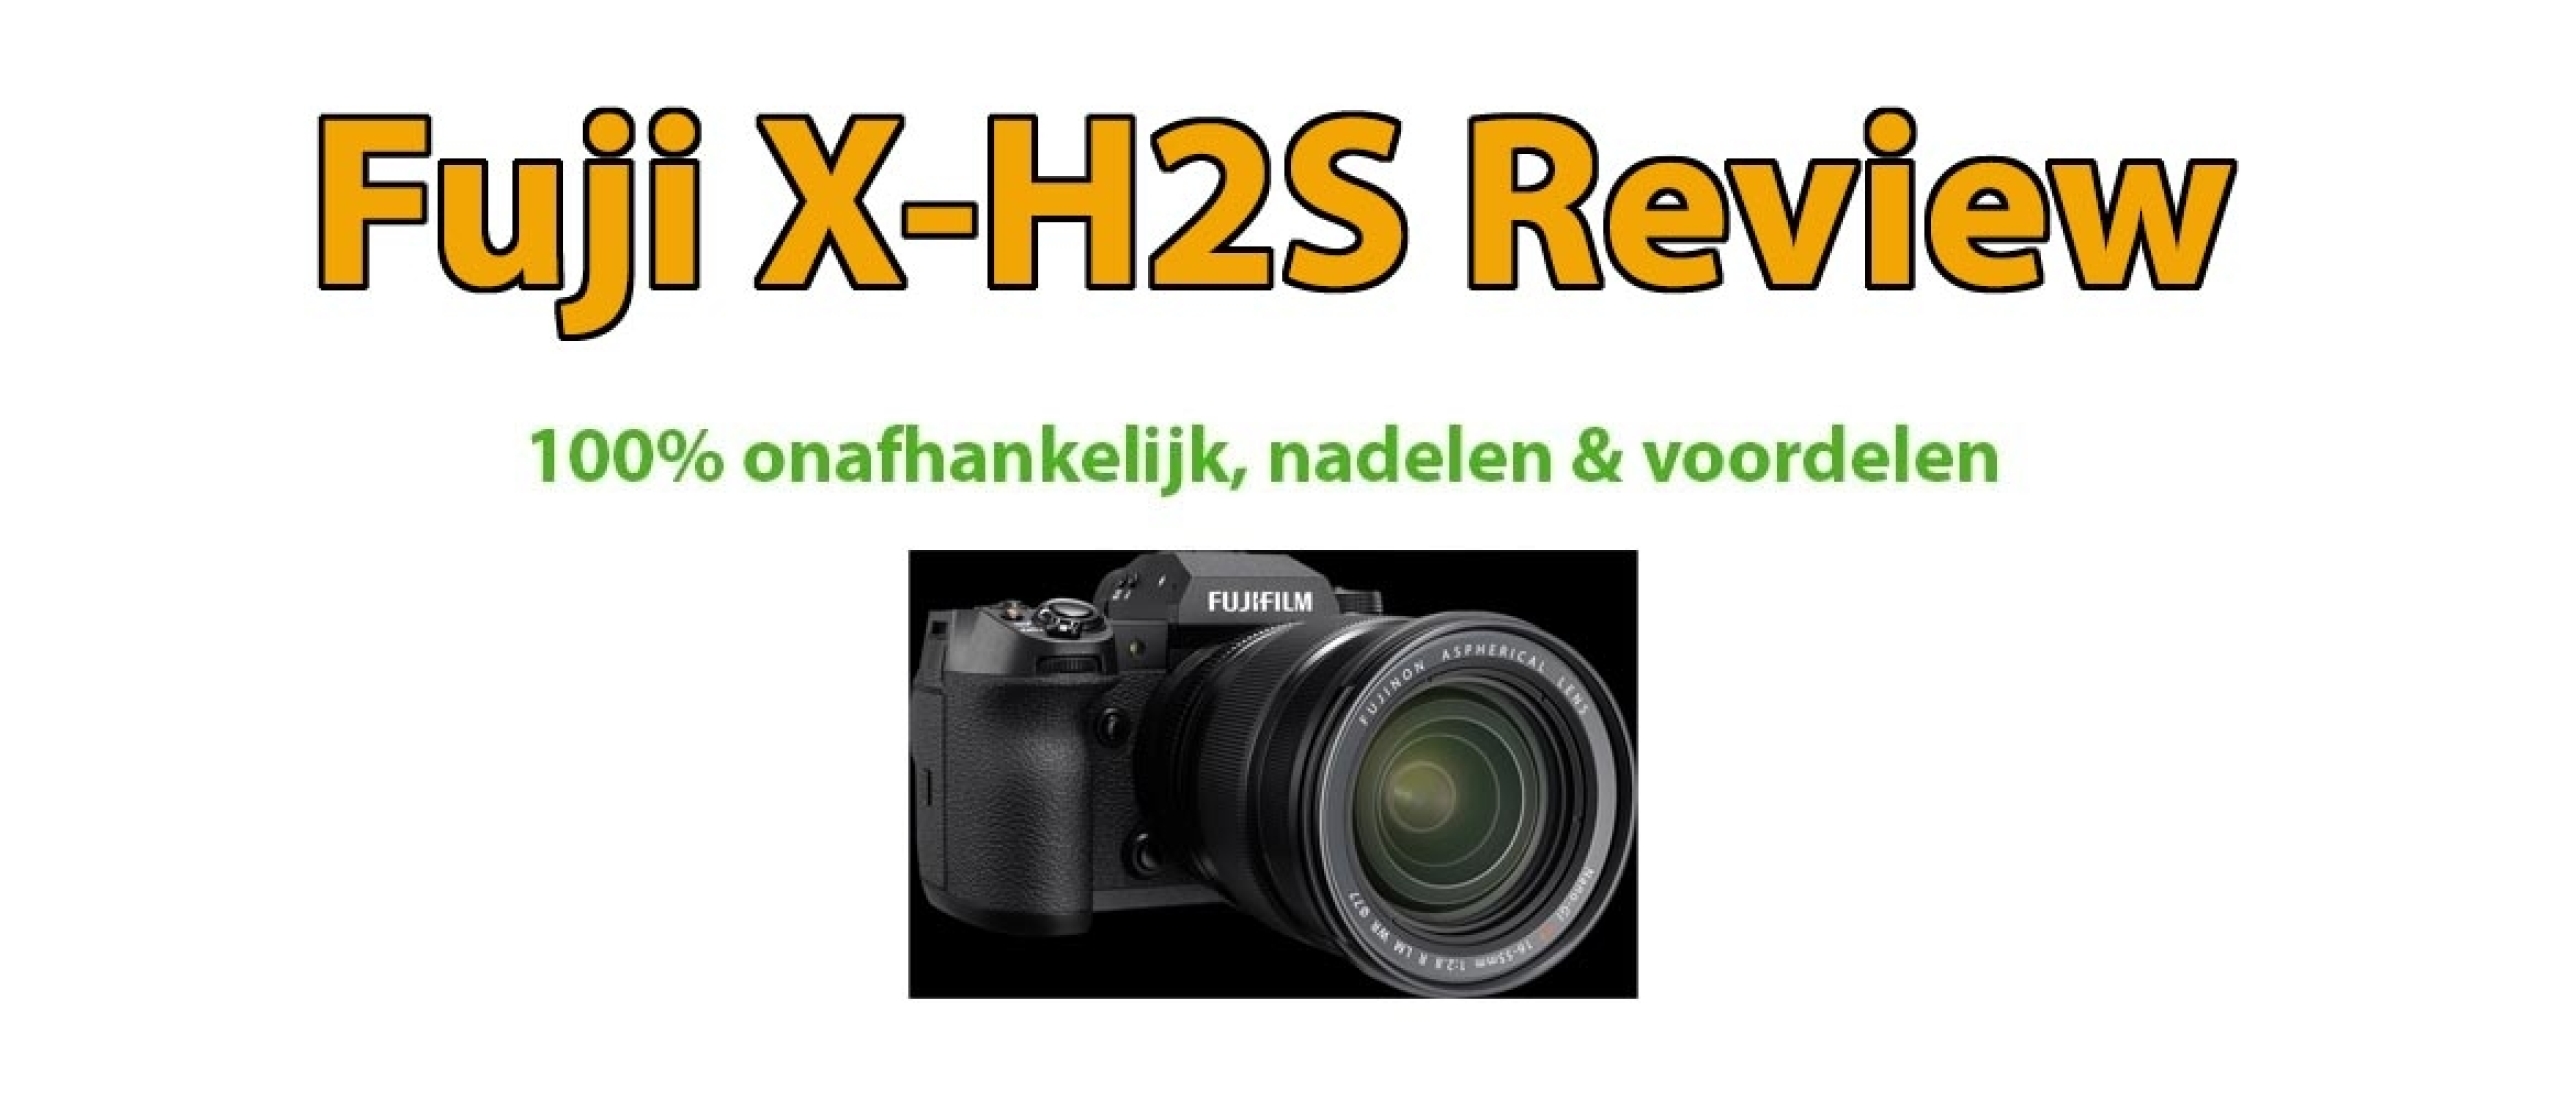 Fujifilm X-H2S systeemcamera Review